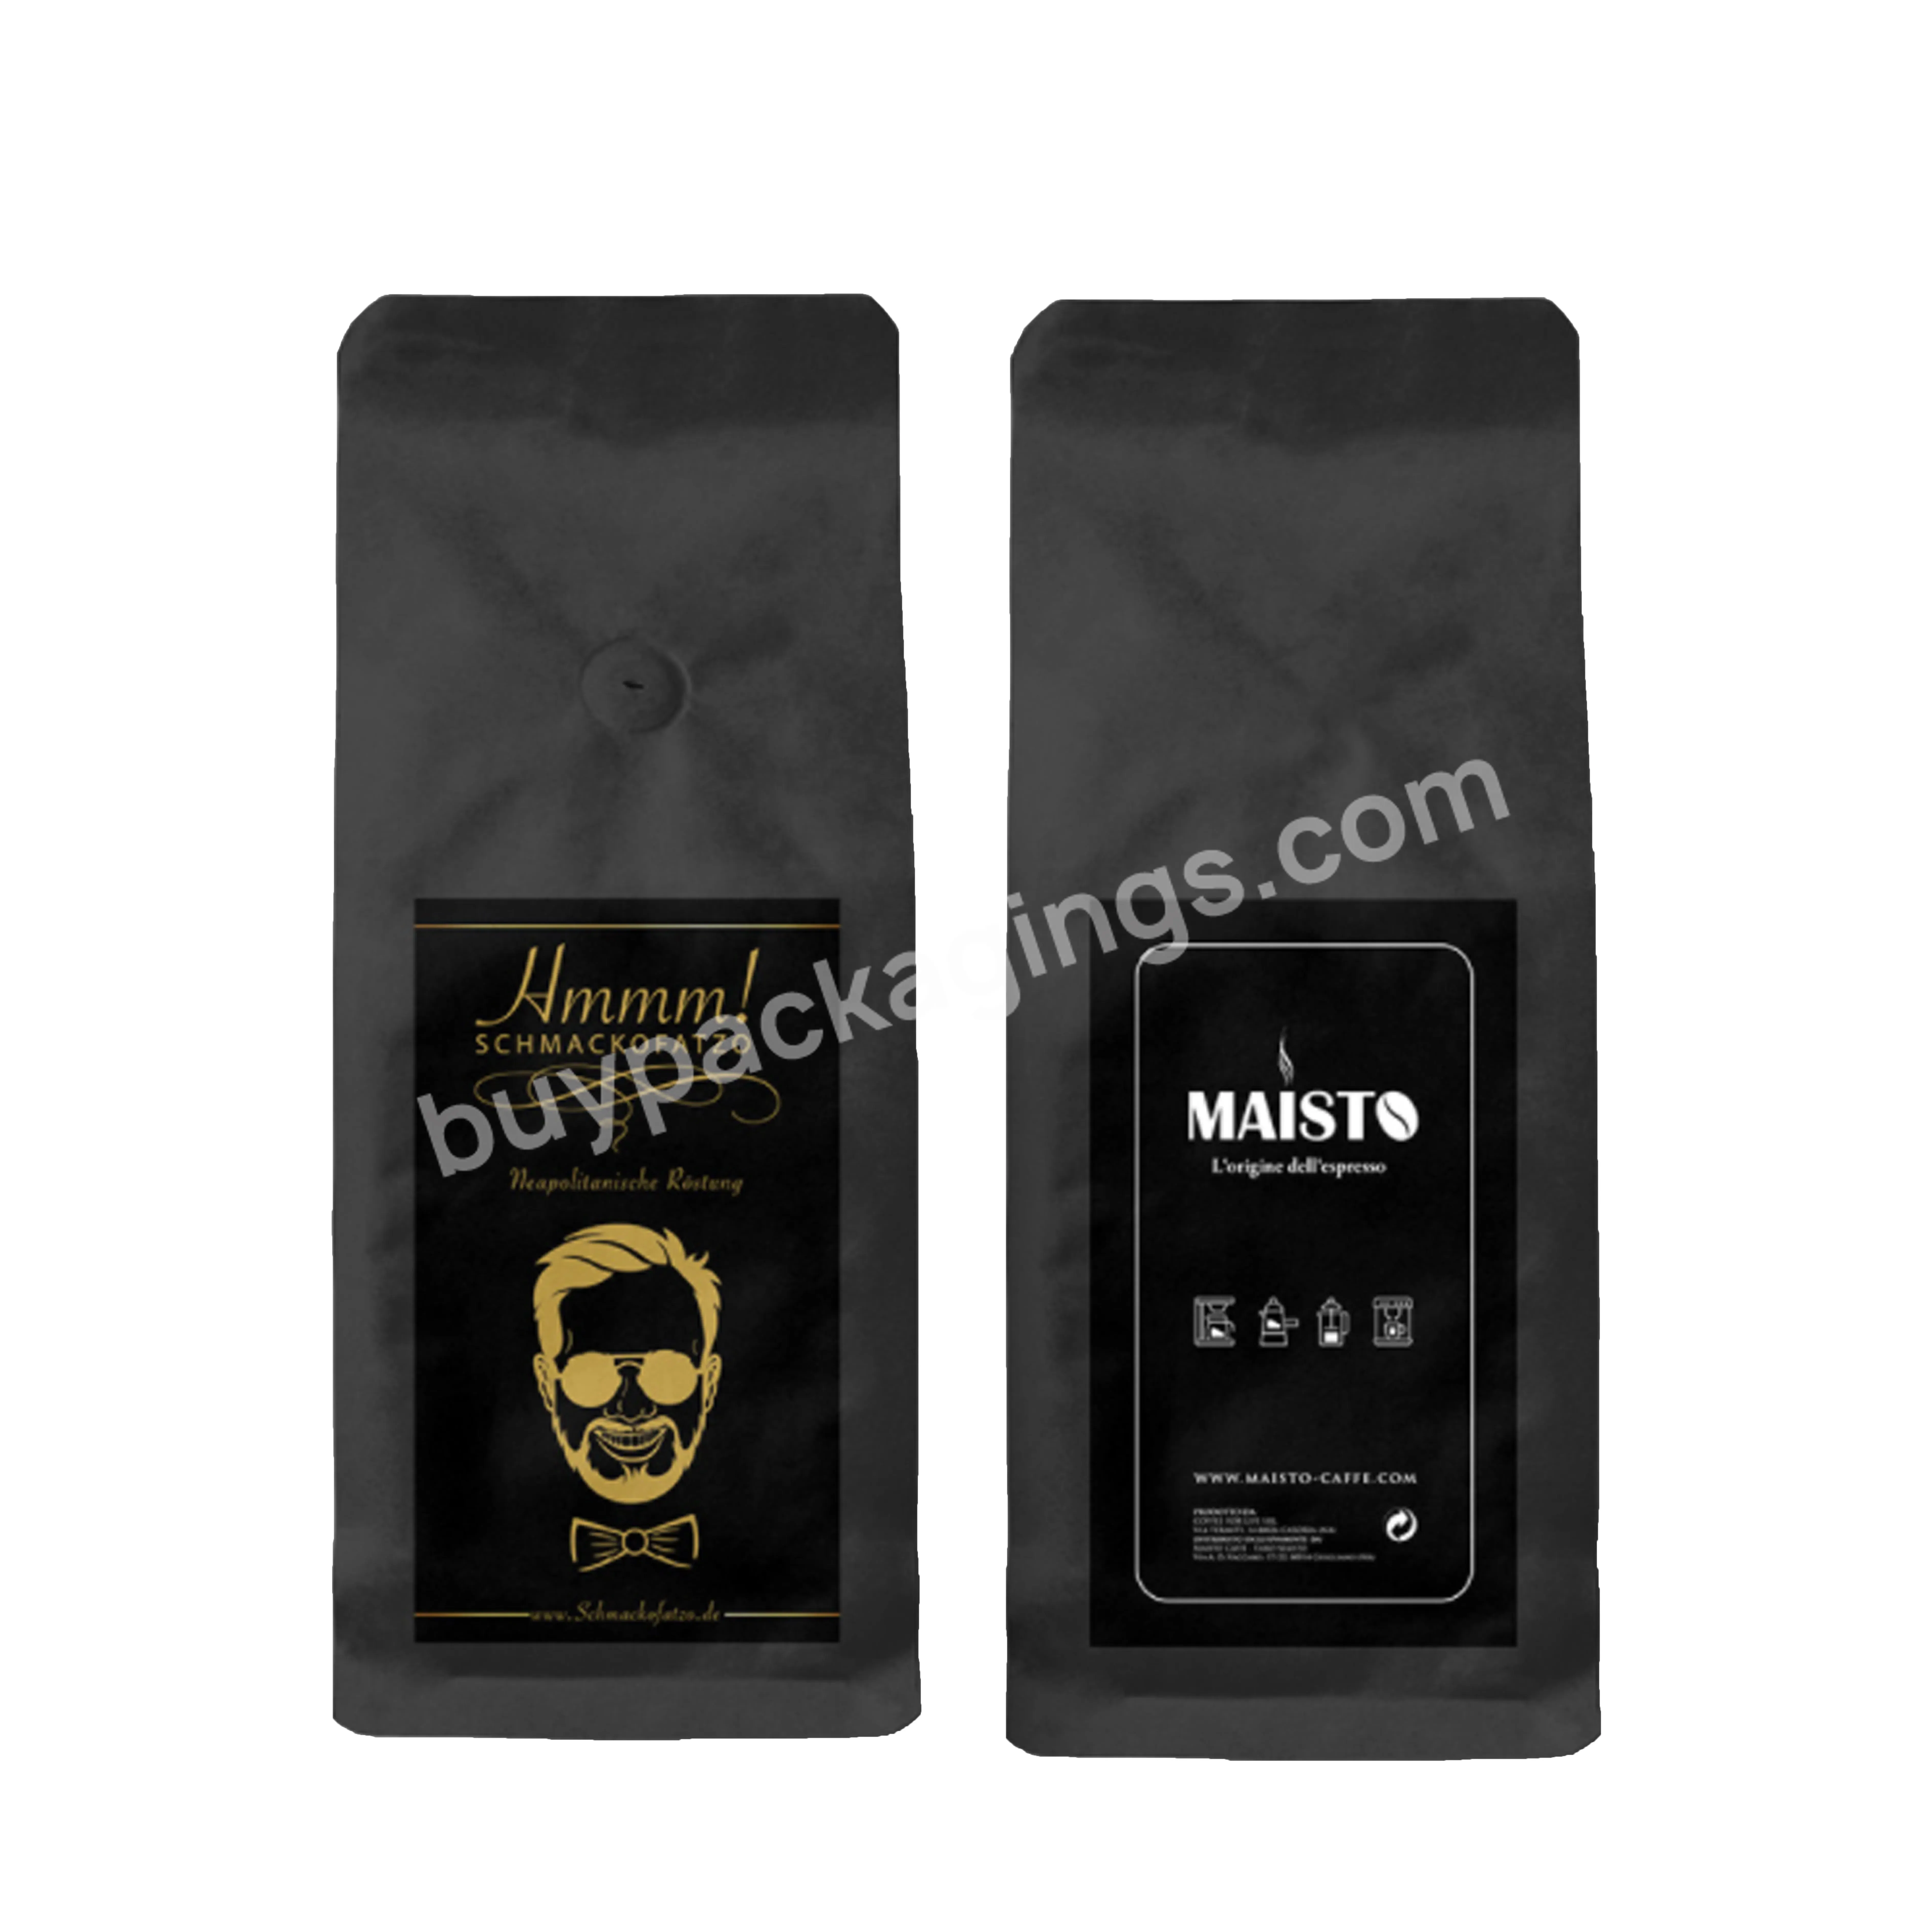 Food Grade Coffee Pouch Private Label Black Coffee Pouch 7.8x4.5 Beans Packaging Box Bags Ldpe Pouch For Coffee With Zipper - Buy Black Coffee Pouch 7.8x4.5,Coffee Pouch Private Label,Ldpe Pouch For Coffee.